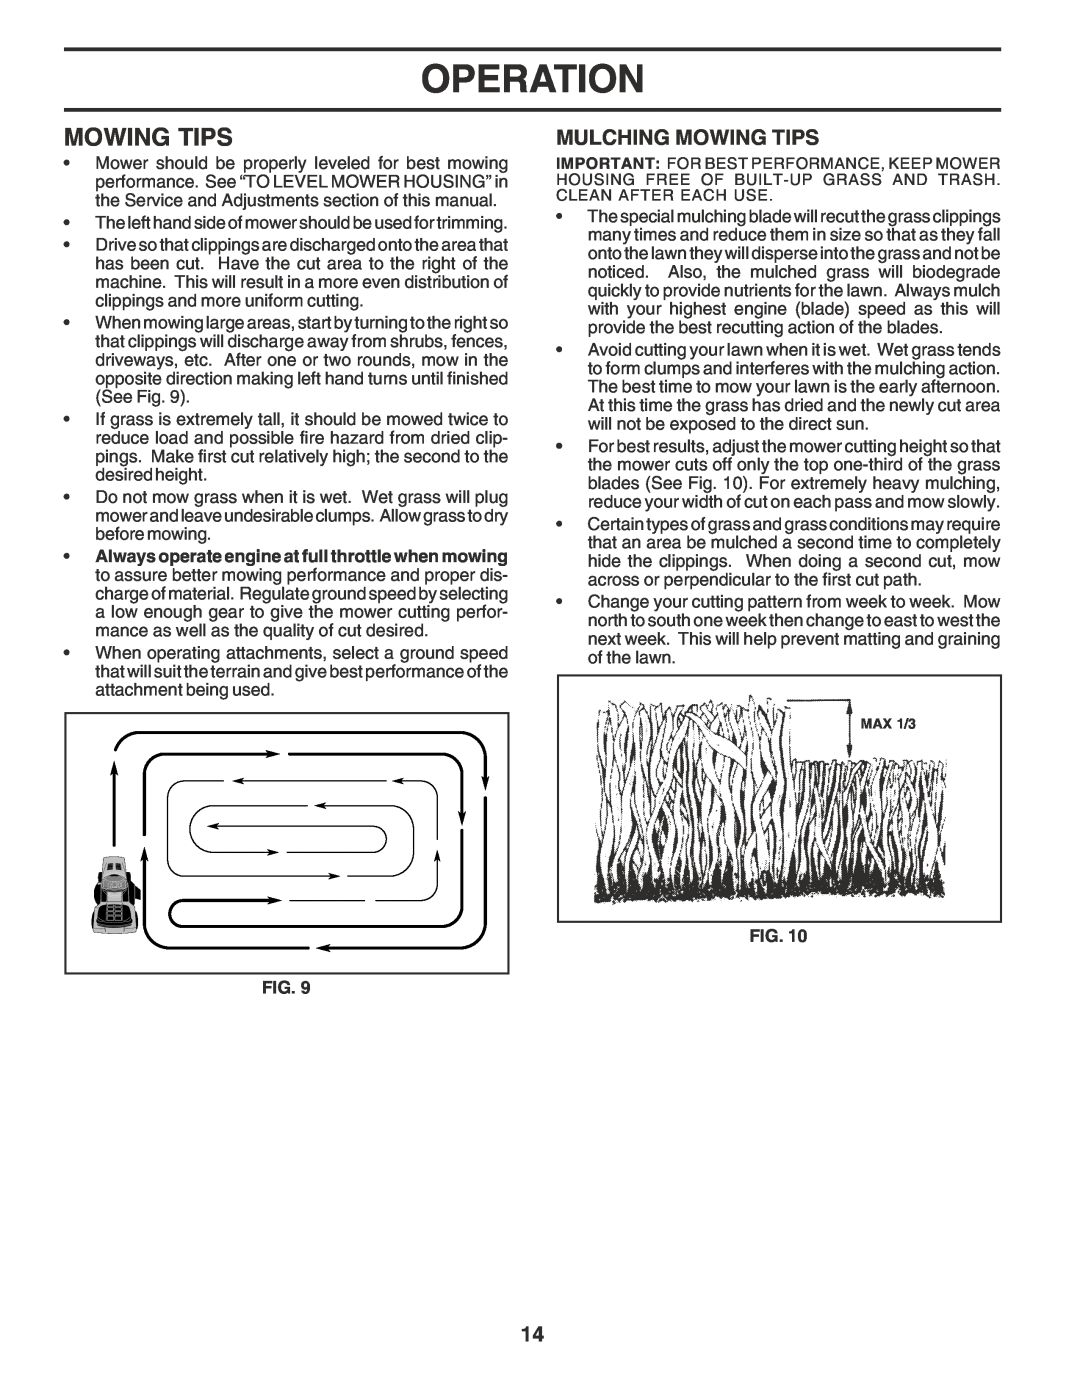 Poulan PPR2042STB owner manual Mulching Mowing Tips, Operation 